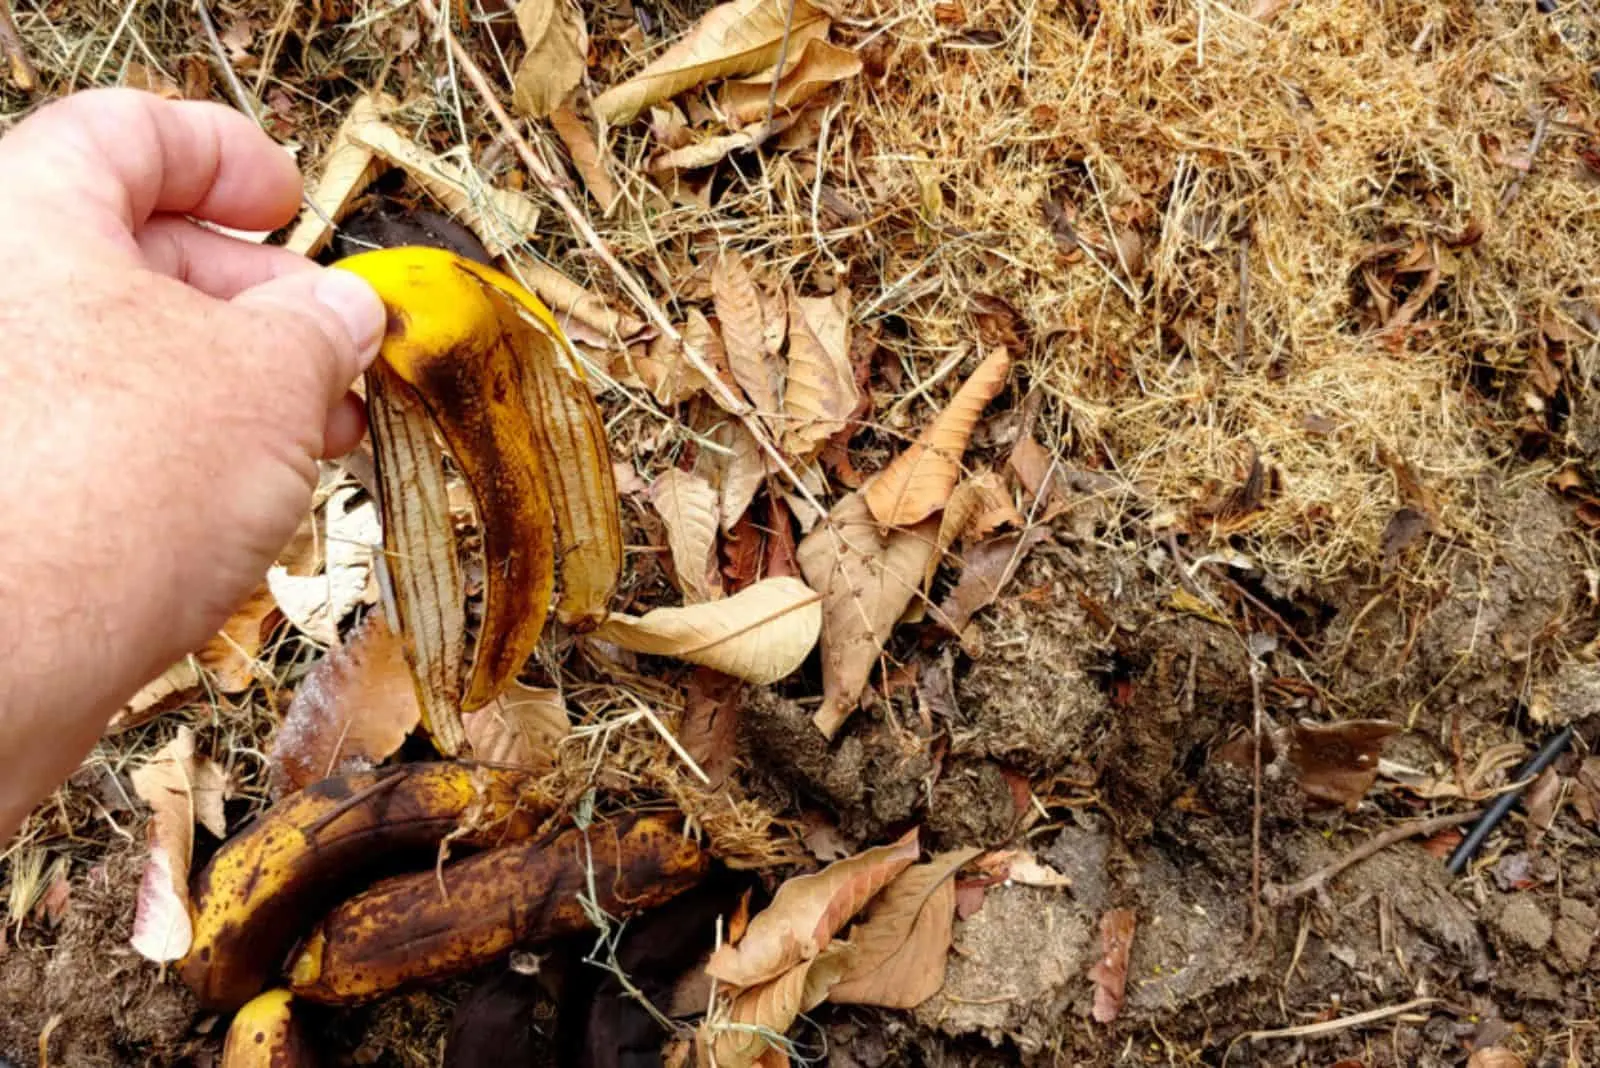 Gardner's Hand Is Shown Recycling A Banana Peel As He Places It In A Compost Pile